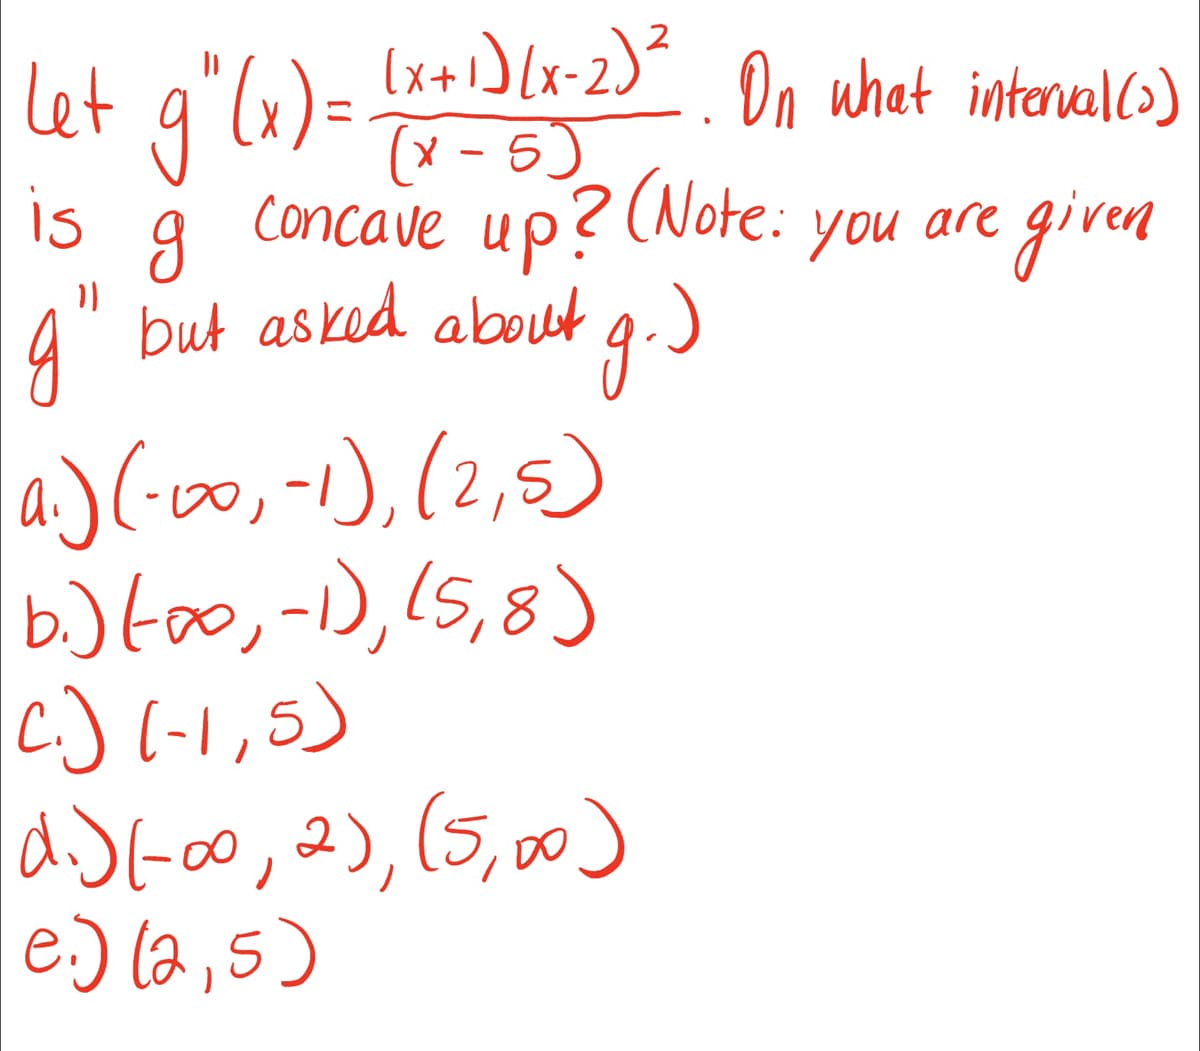 (x + 1)(x-2)². On what interval (2)
(x - 5)
let g" (x) =
is g Concave up? (Note:
g" but asked about g.)
a.) (-00, -1), (2,5)
b.) (0, -1), (5,8)
C.) (-1,5)
d.) (-00, 2), (5,00)
e.) (2,5)
you
are given